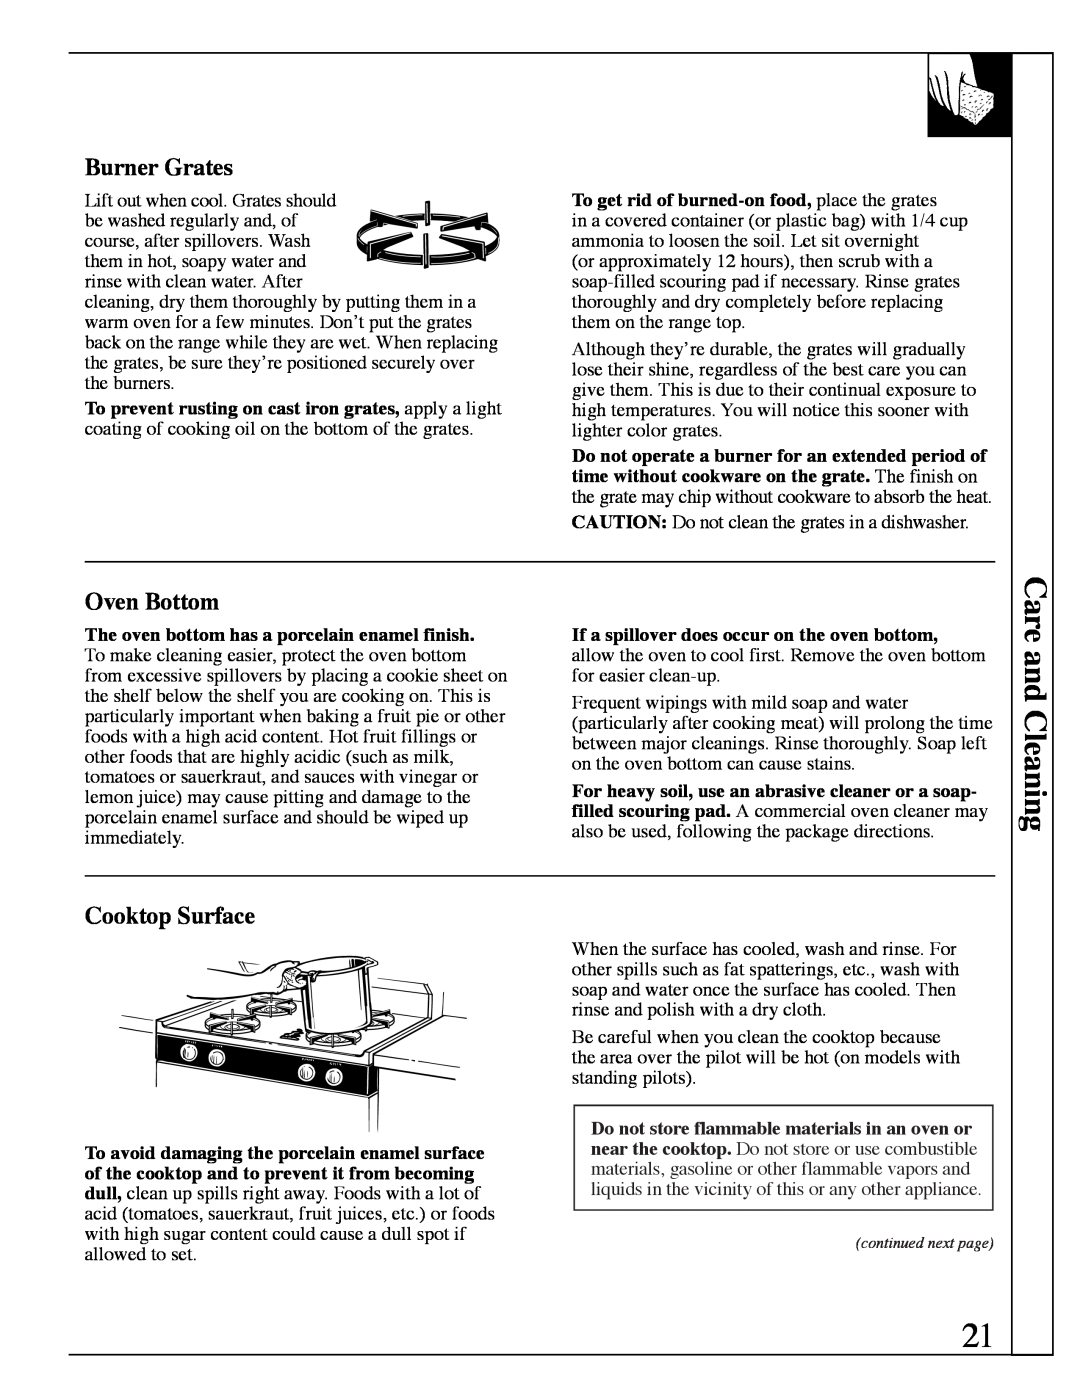 Hotpoint RGB506 installation instructions Care and Cleaning, Burner Grates, Oven Bottom, Cooktop Surface 